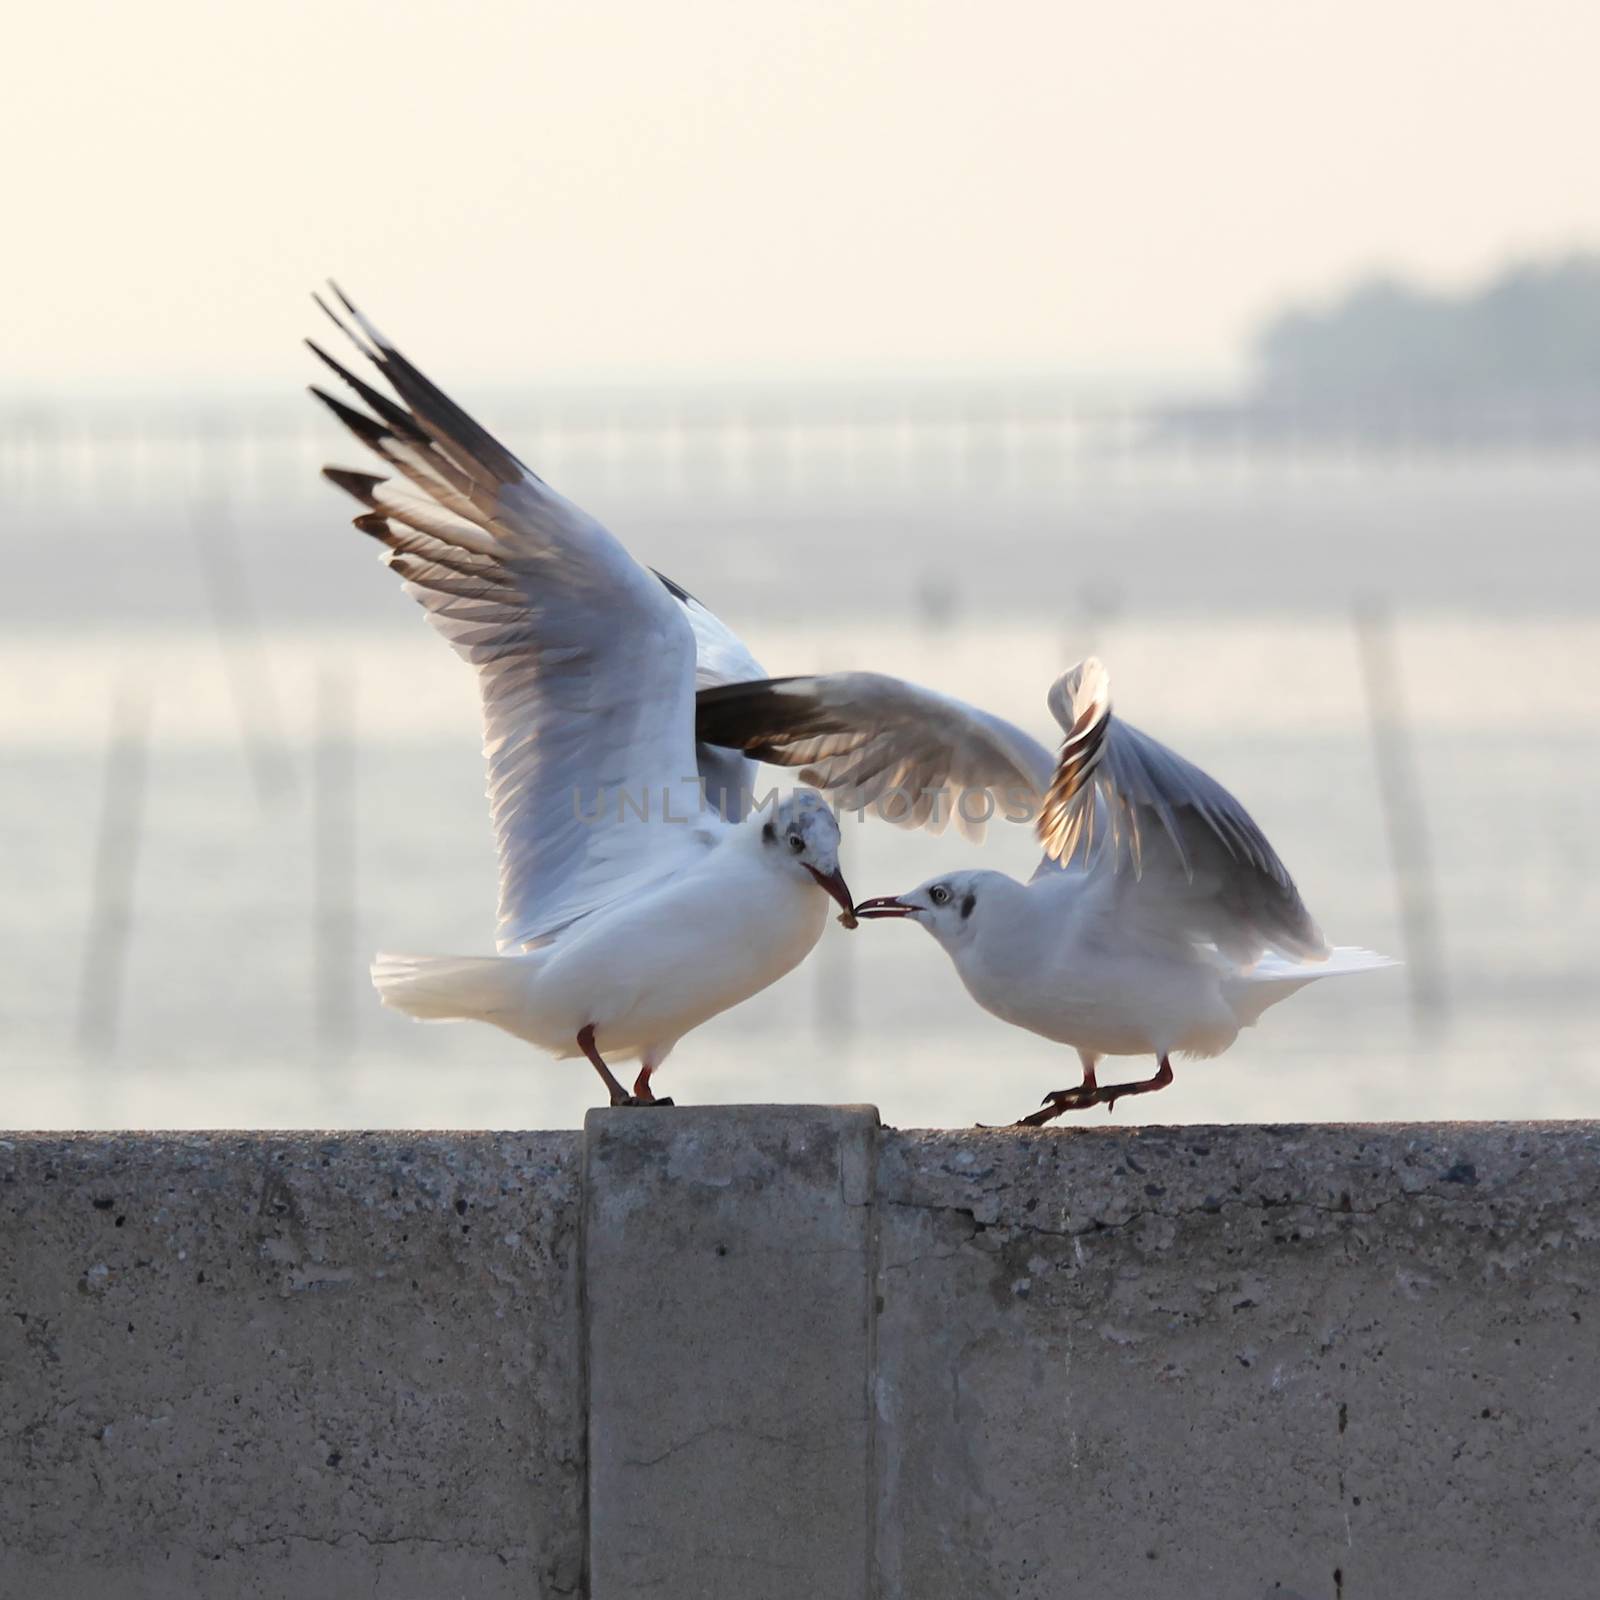 Seagulls fighting for the food